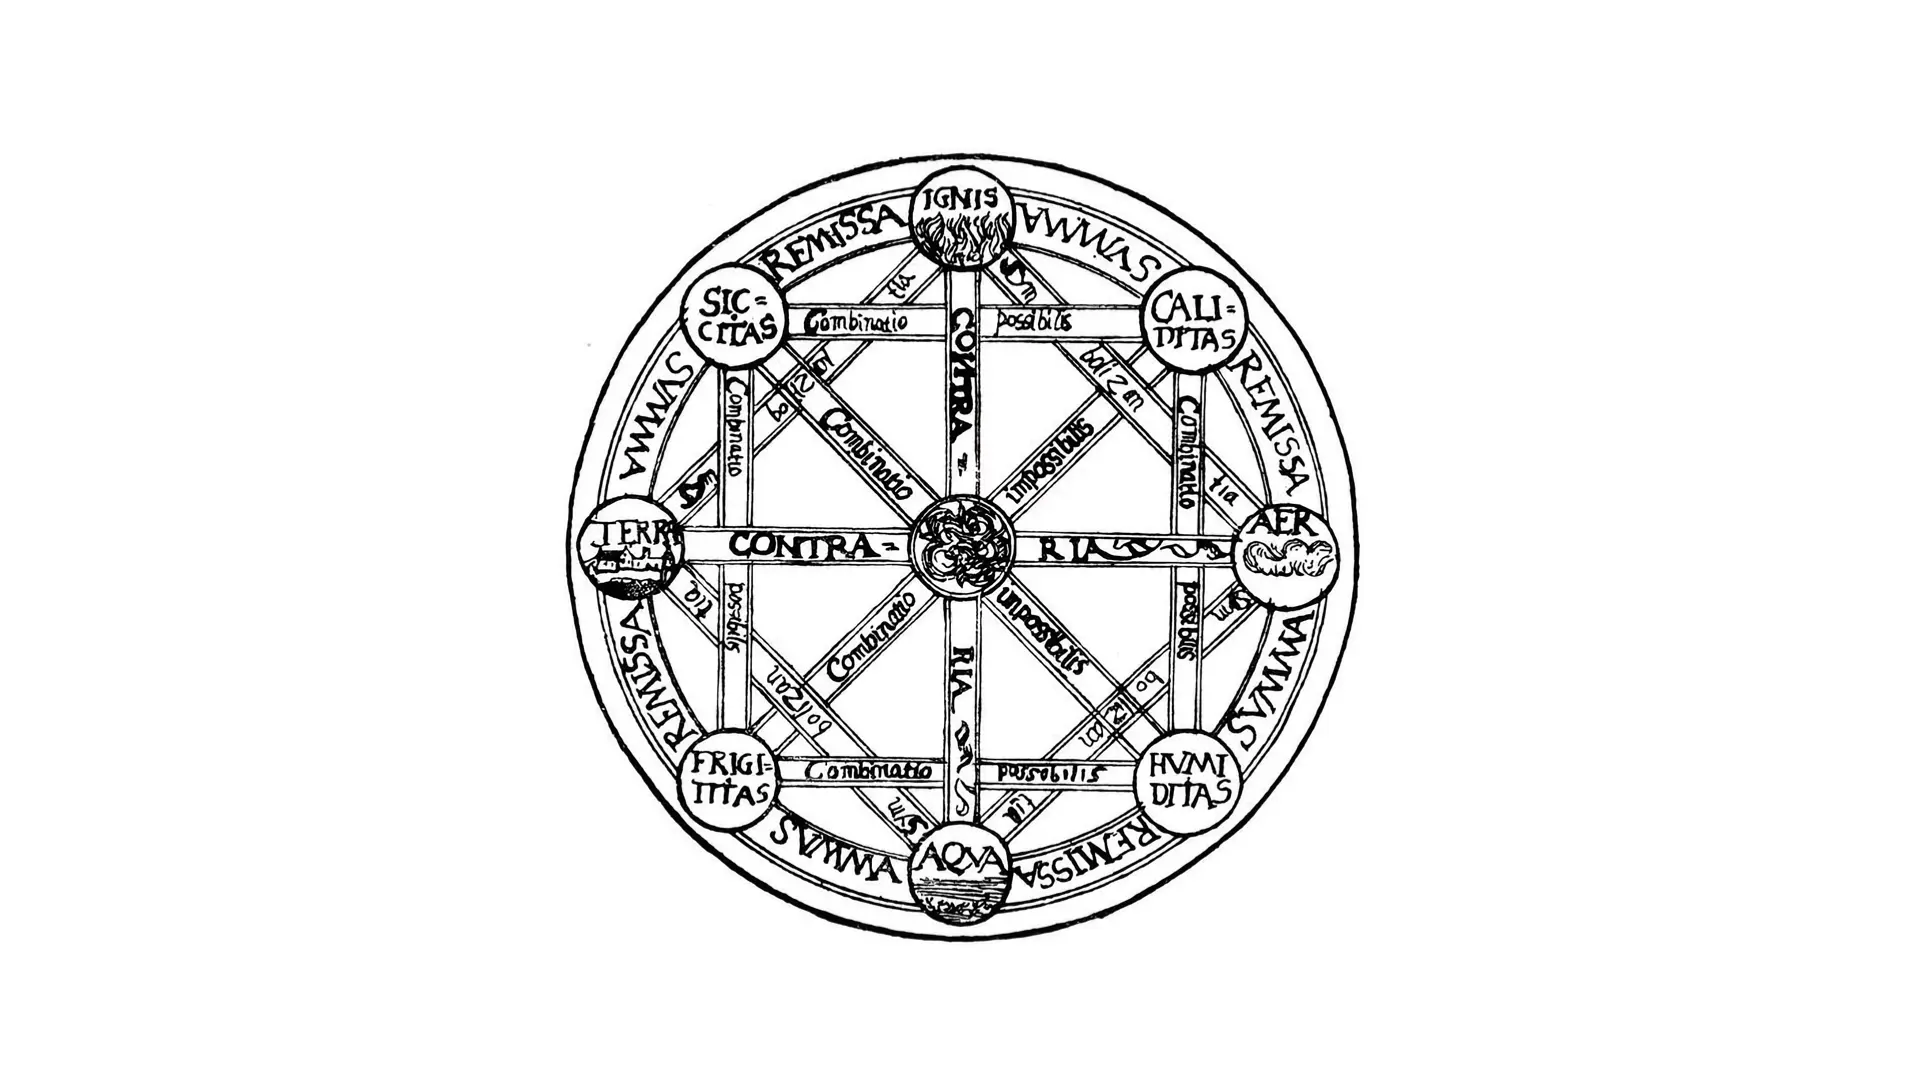 An ancient diagram showing the four classical elements in Latin: Ignis, Aer, Aqua, and Terra